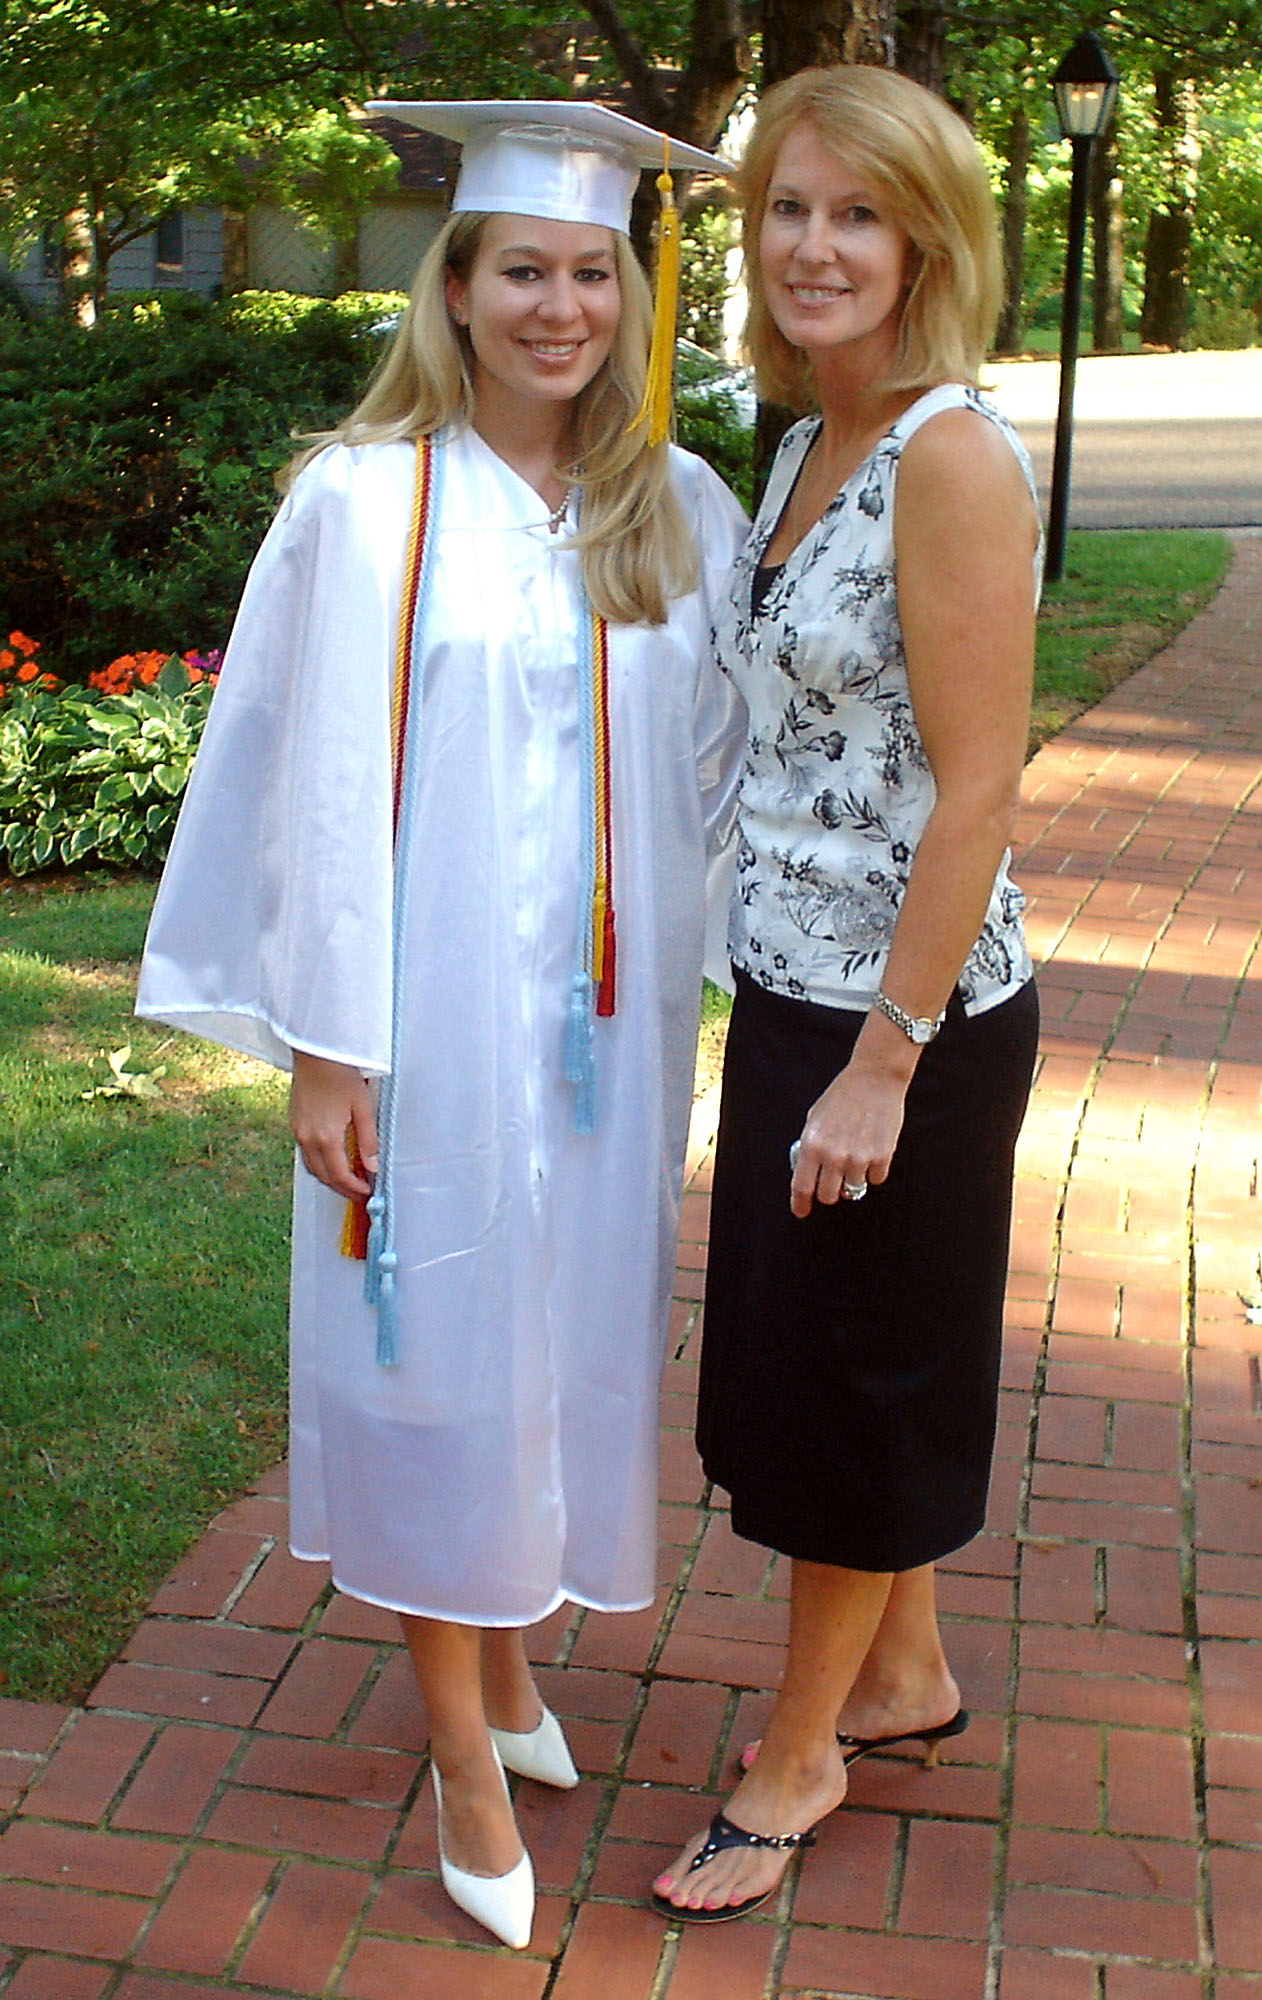 PHOTO:In this undated handout photo, Natalee Holloway, 18, stands with her mother, Beth Twitty, at her home before her high school graduation ceremony from Mountain Brook High School in Alabama, May 24, 2005.